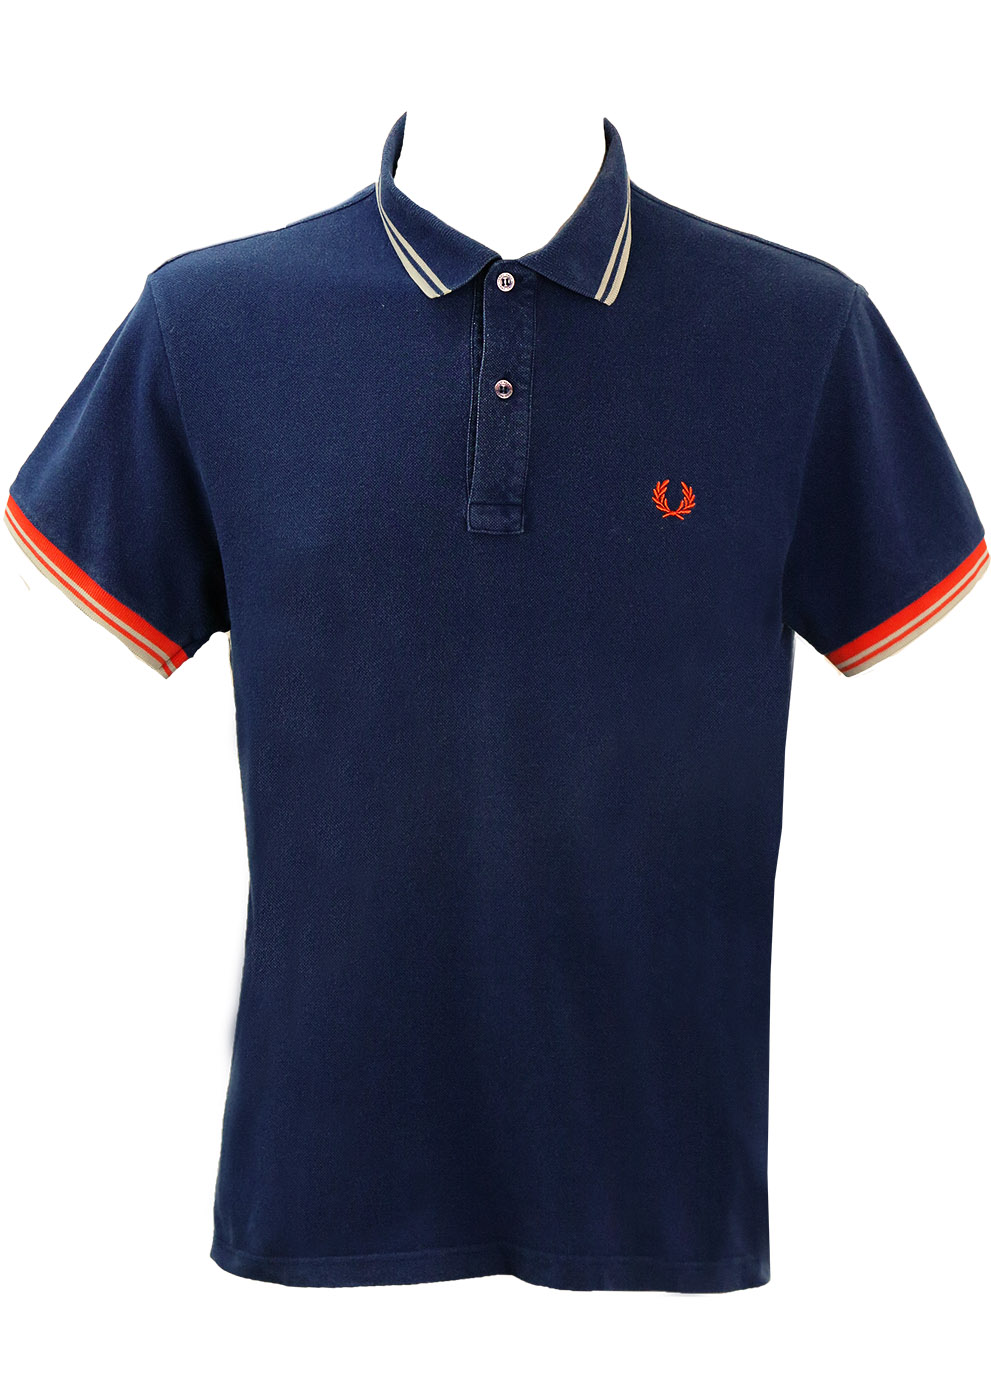 Fred Perry 'Special Edition' Blue Polo Shirt with Near Neon Orange Trim ...